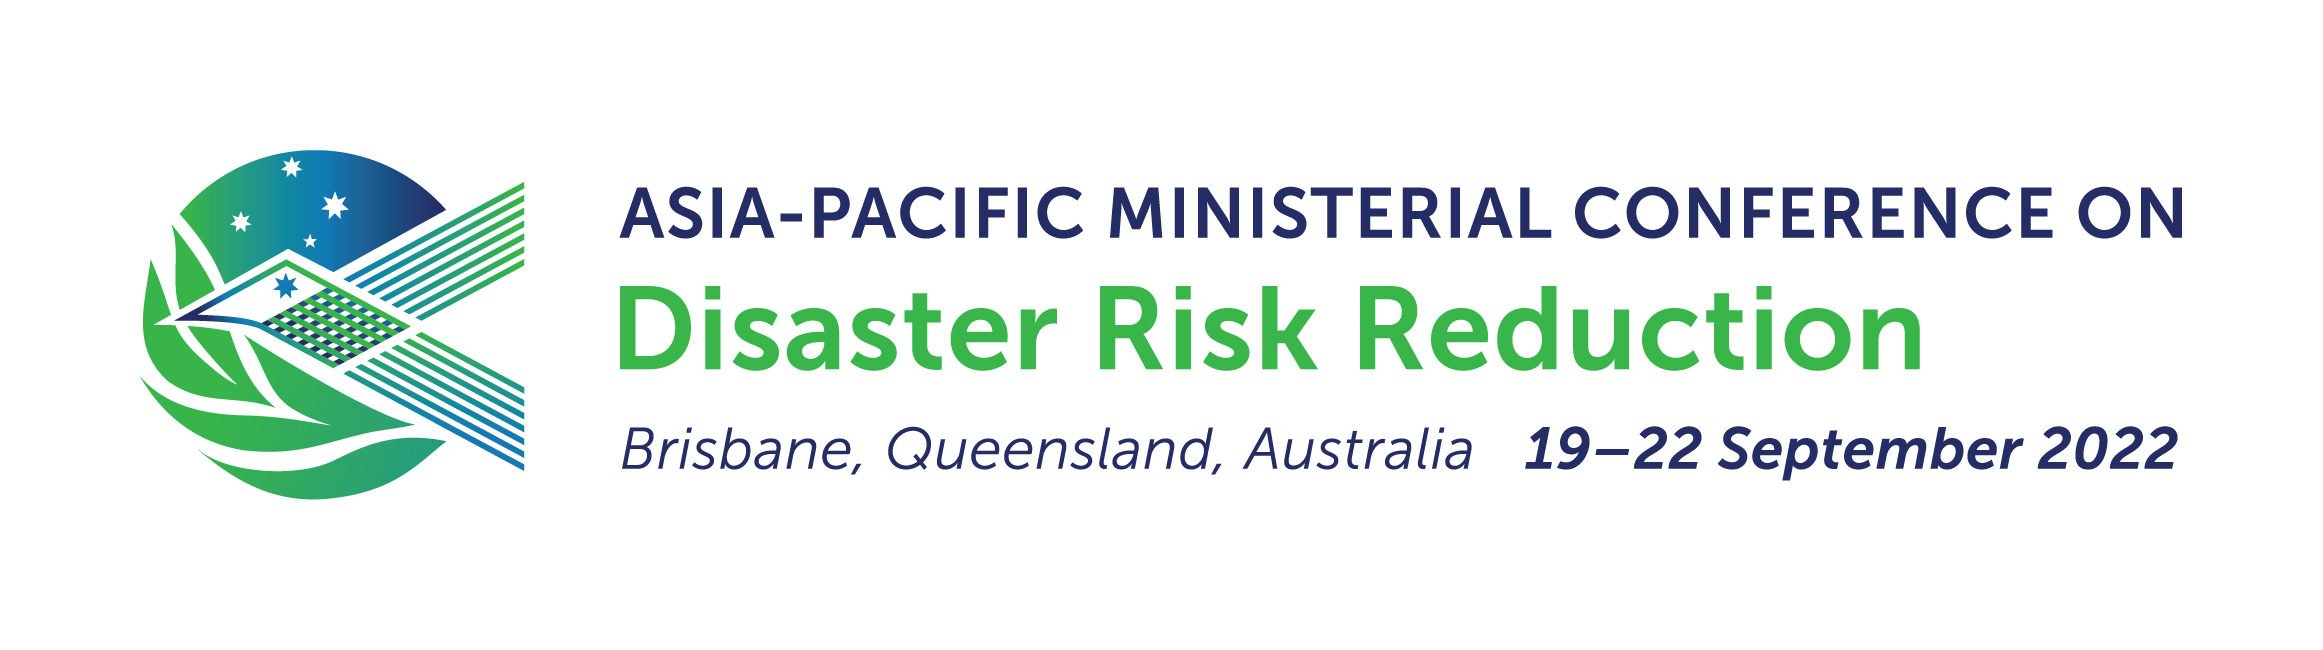 AsiaPacific Ministerial Conference on Disaster Risk Reduction (APMCDRR